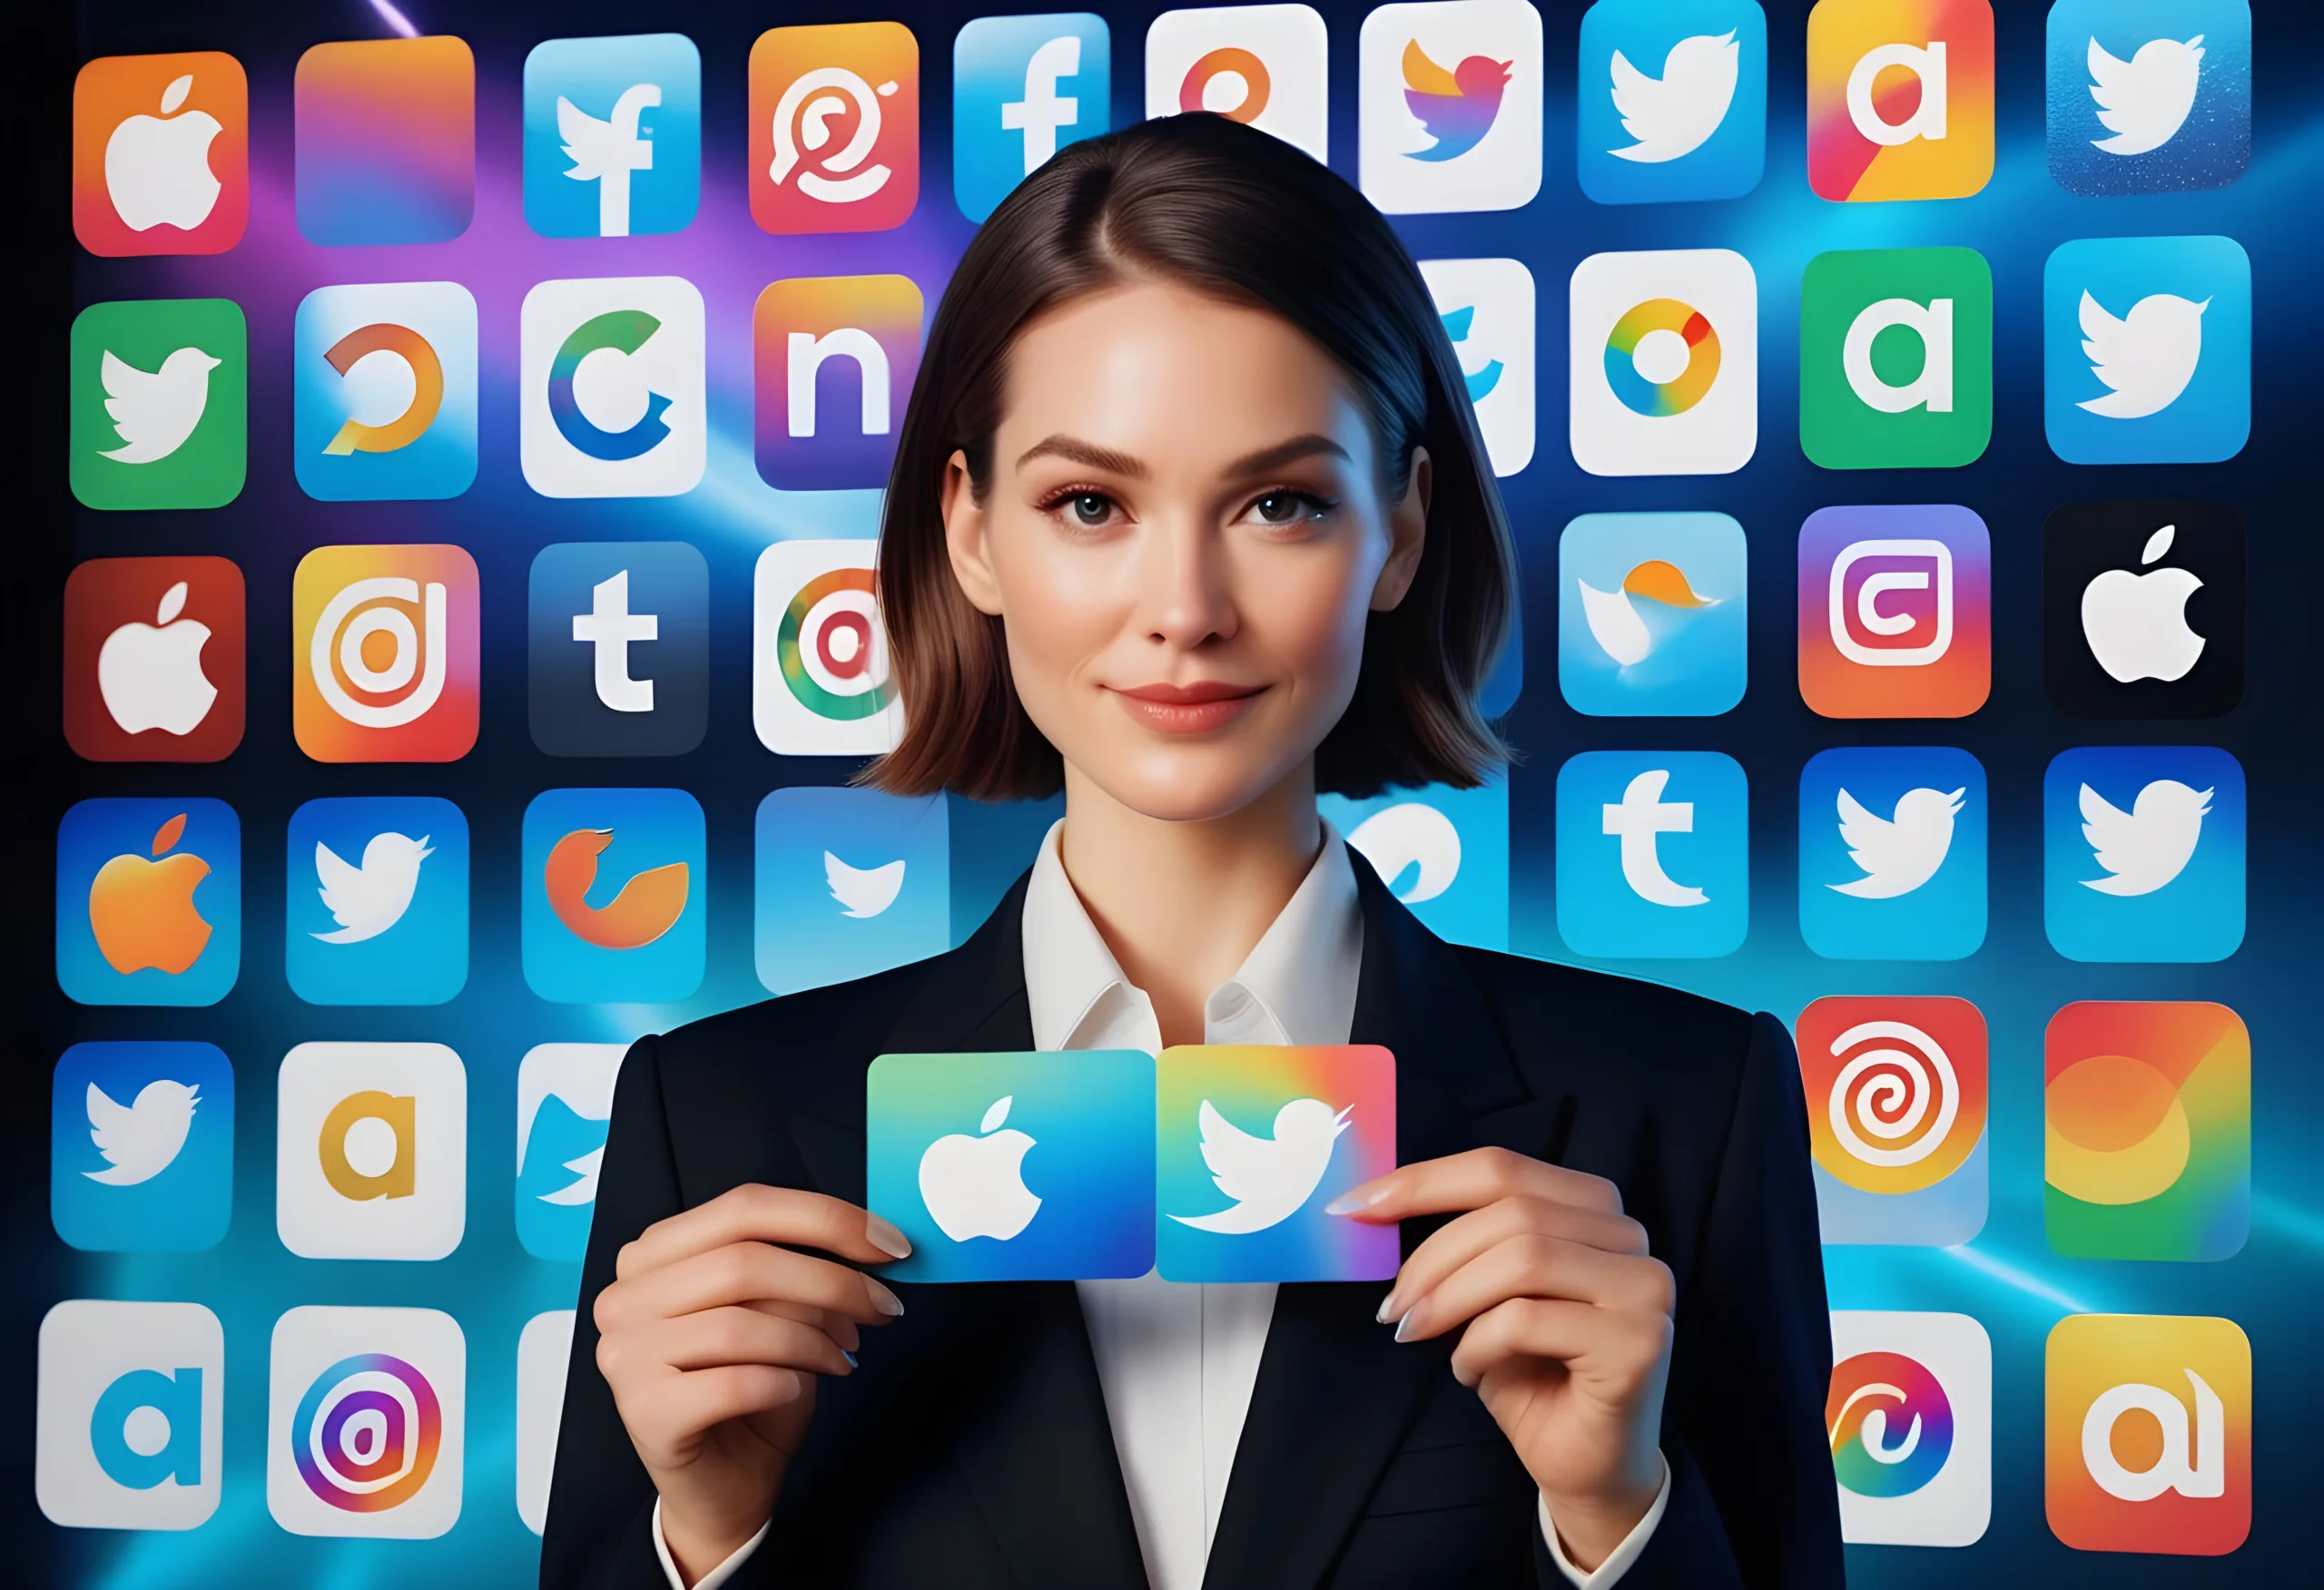 A hot girl is showing various types of pictorial logos and two well known brands, Apple and Twitter logo icon in her hand